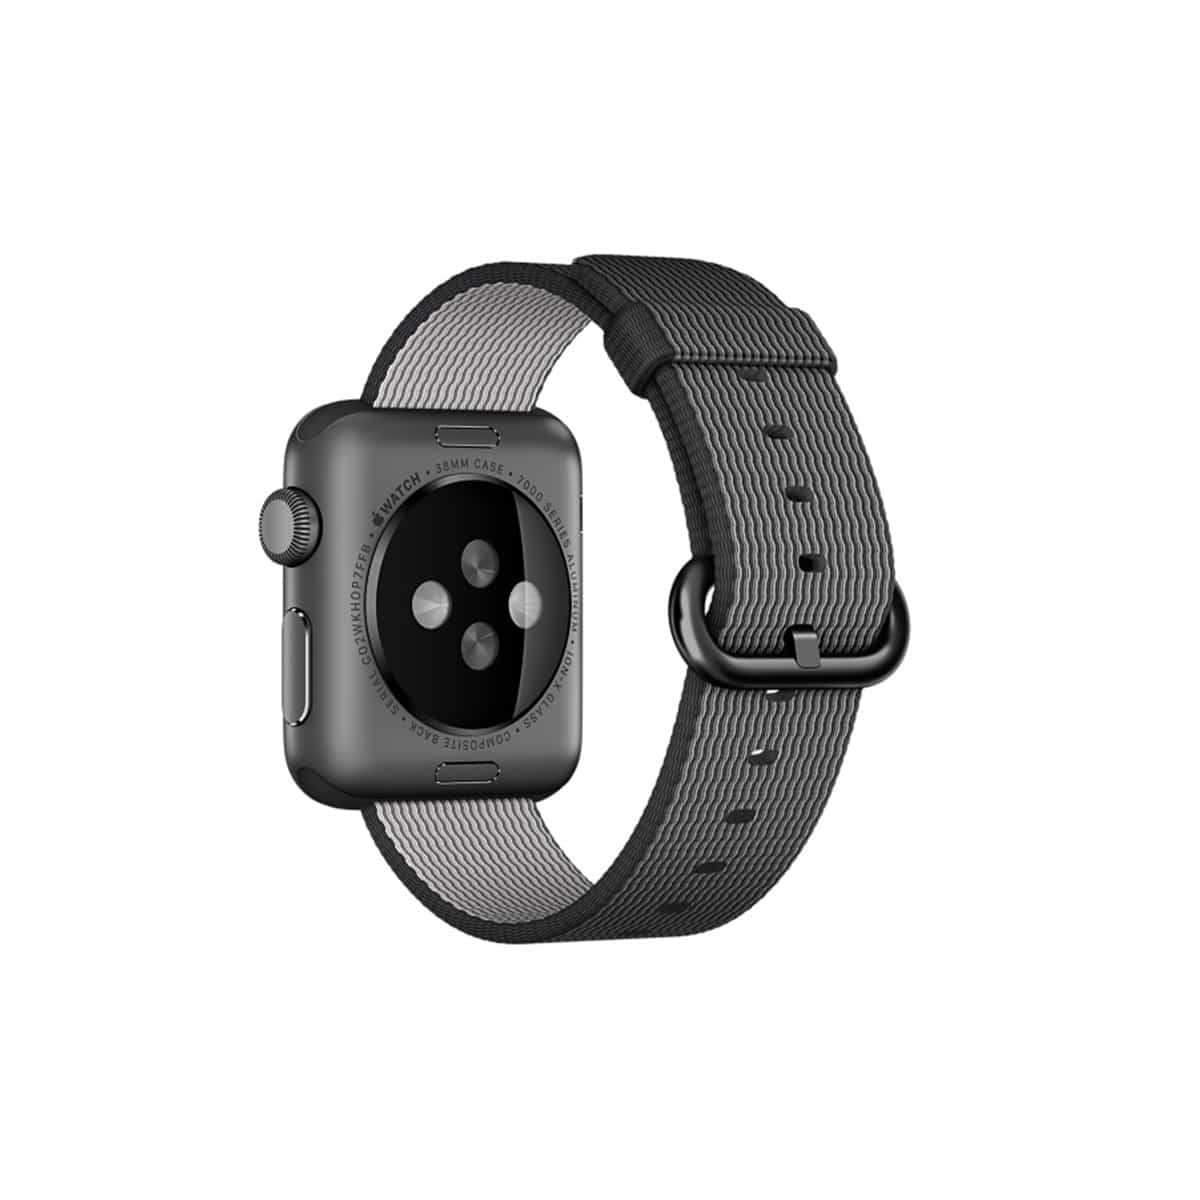 Apple Watch Woven Nylon Band Replacement Straps   